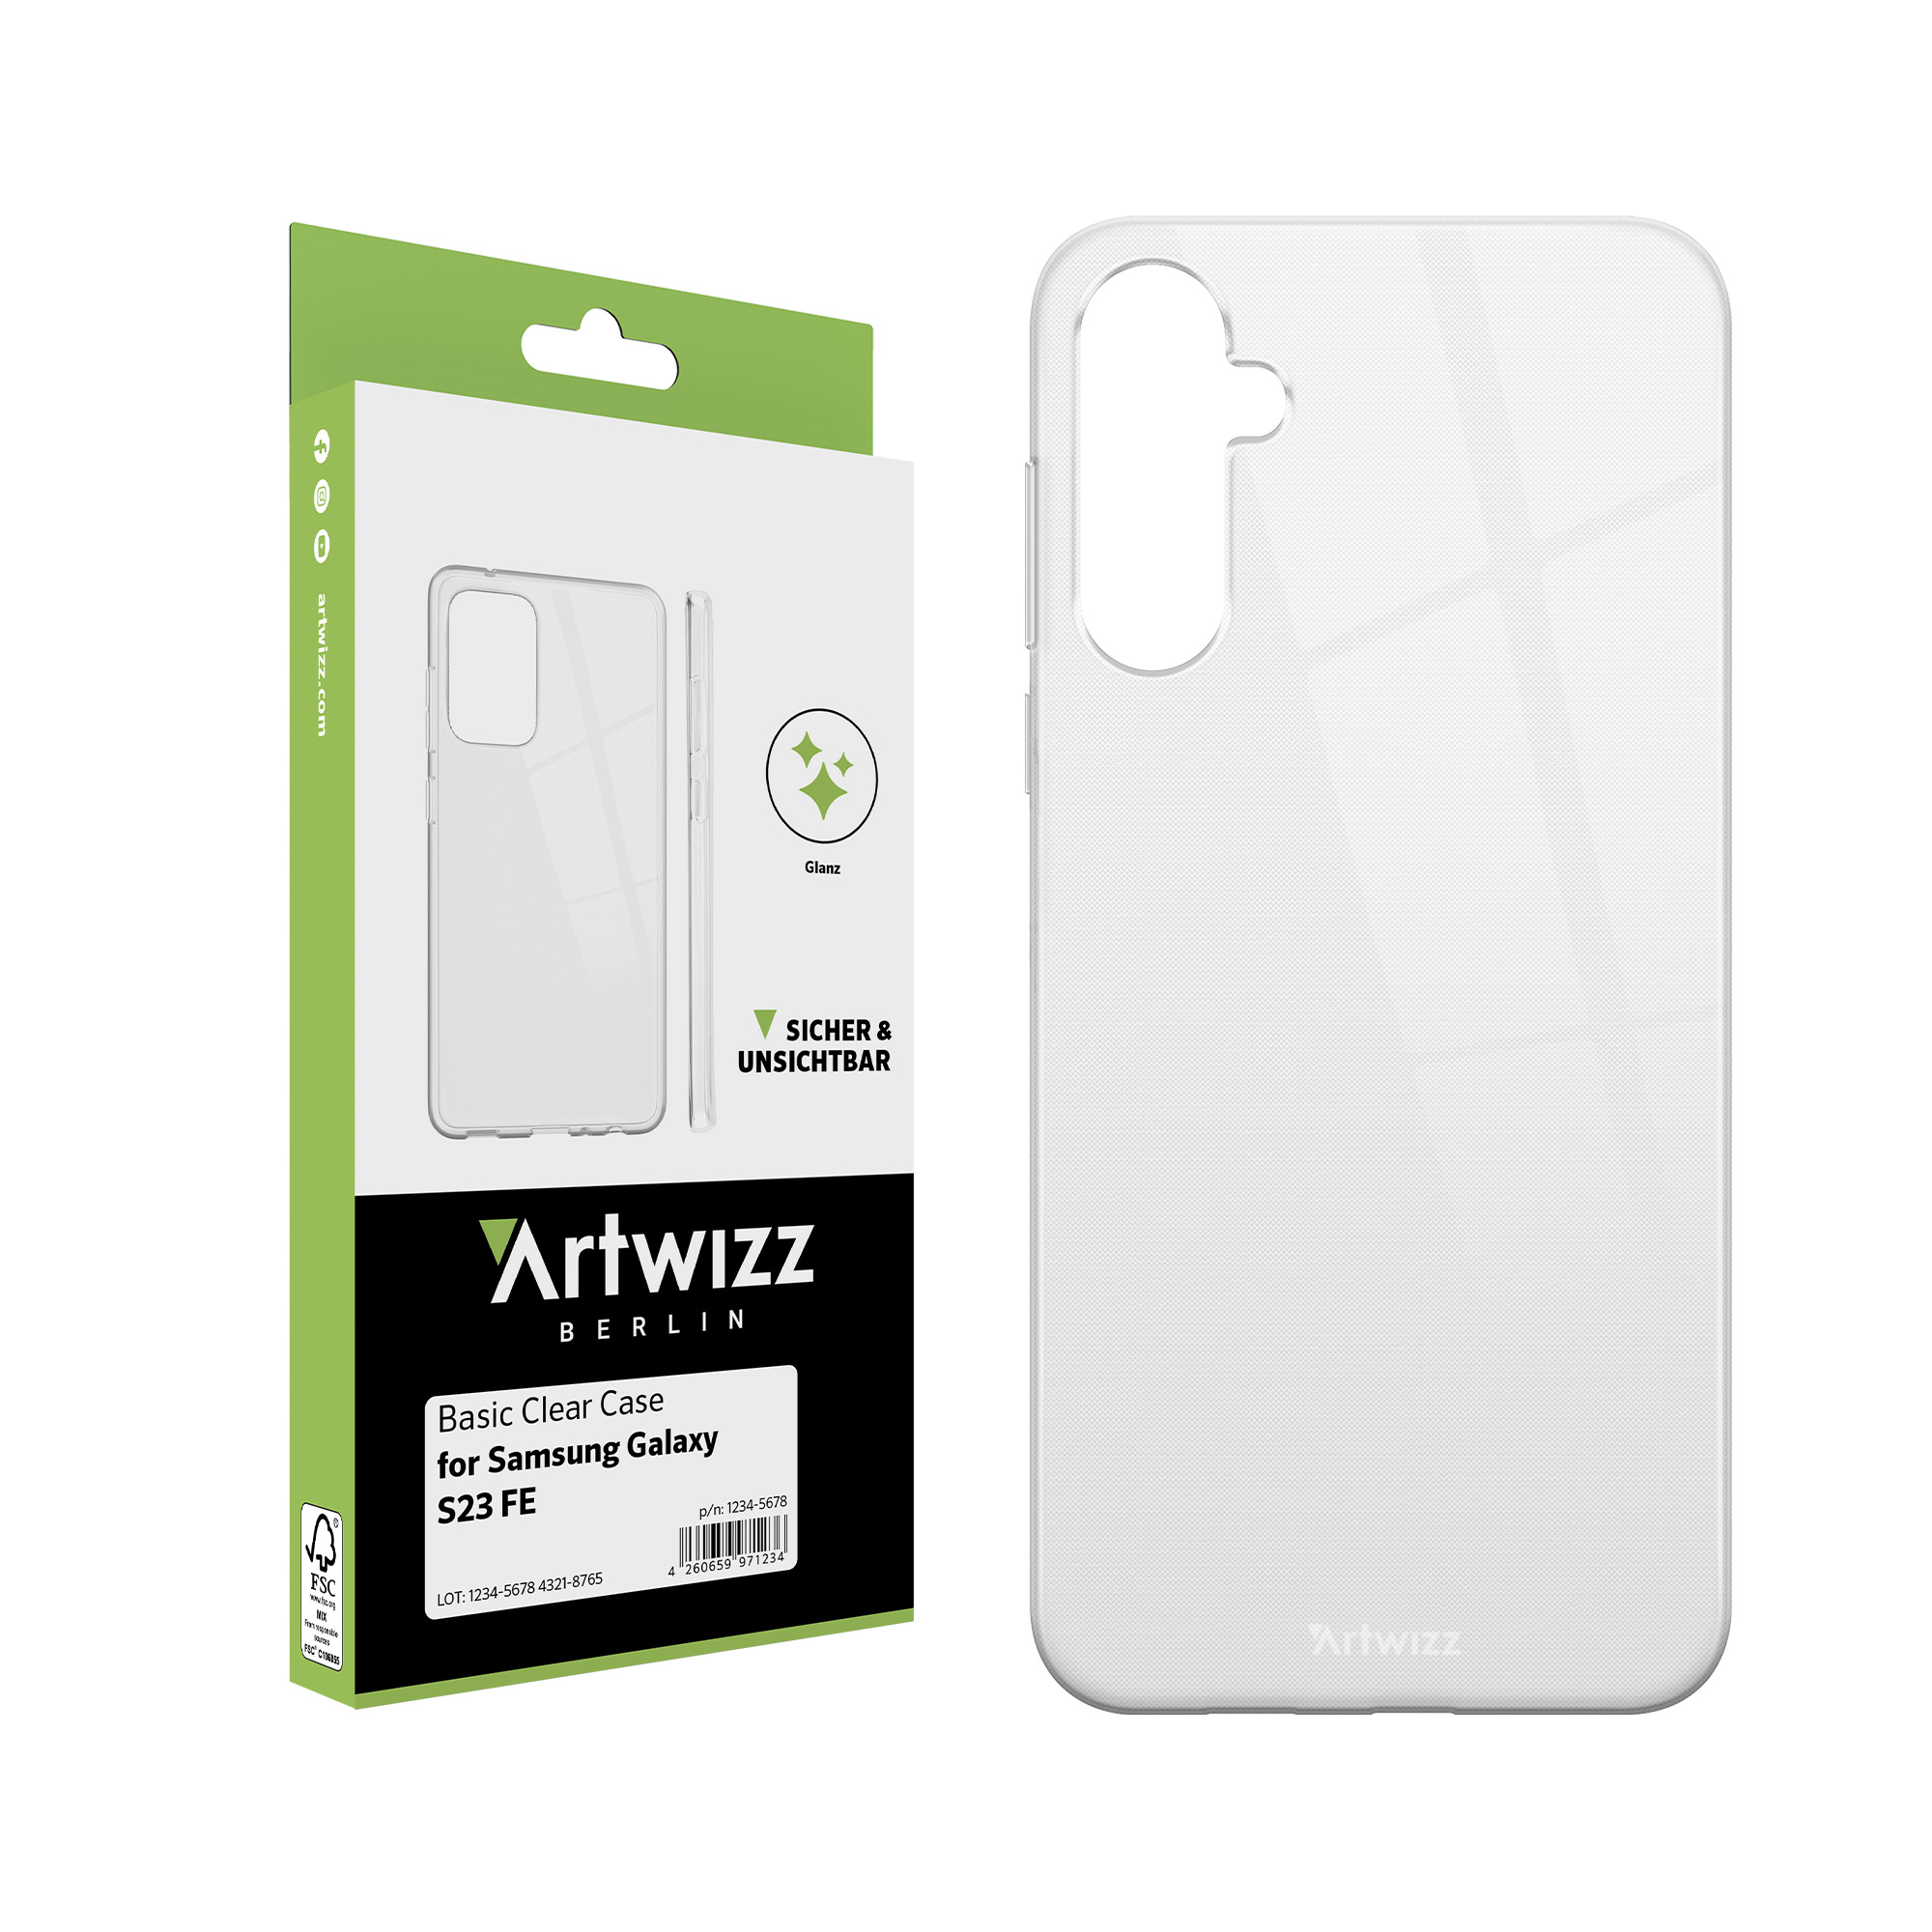 Basic Case, Clear S23 Backcover, Galaxy Transparent ARTWIZZ Samsung, FE,